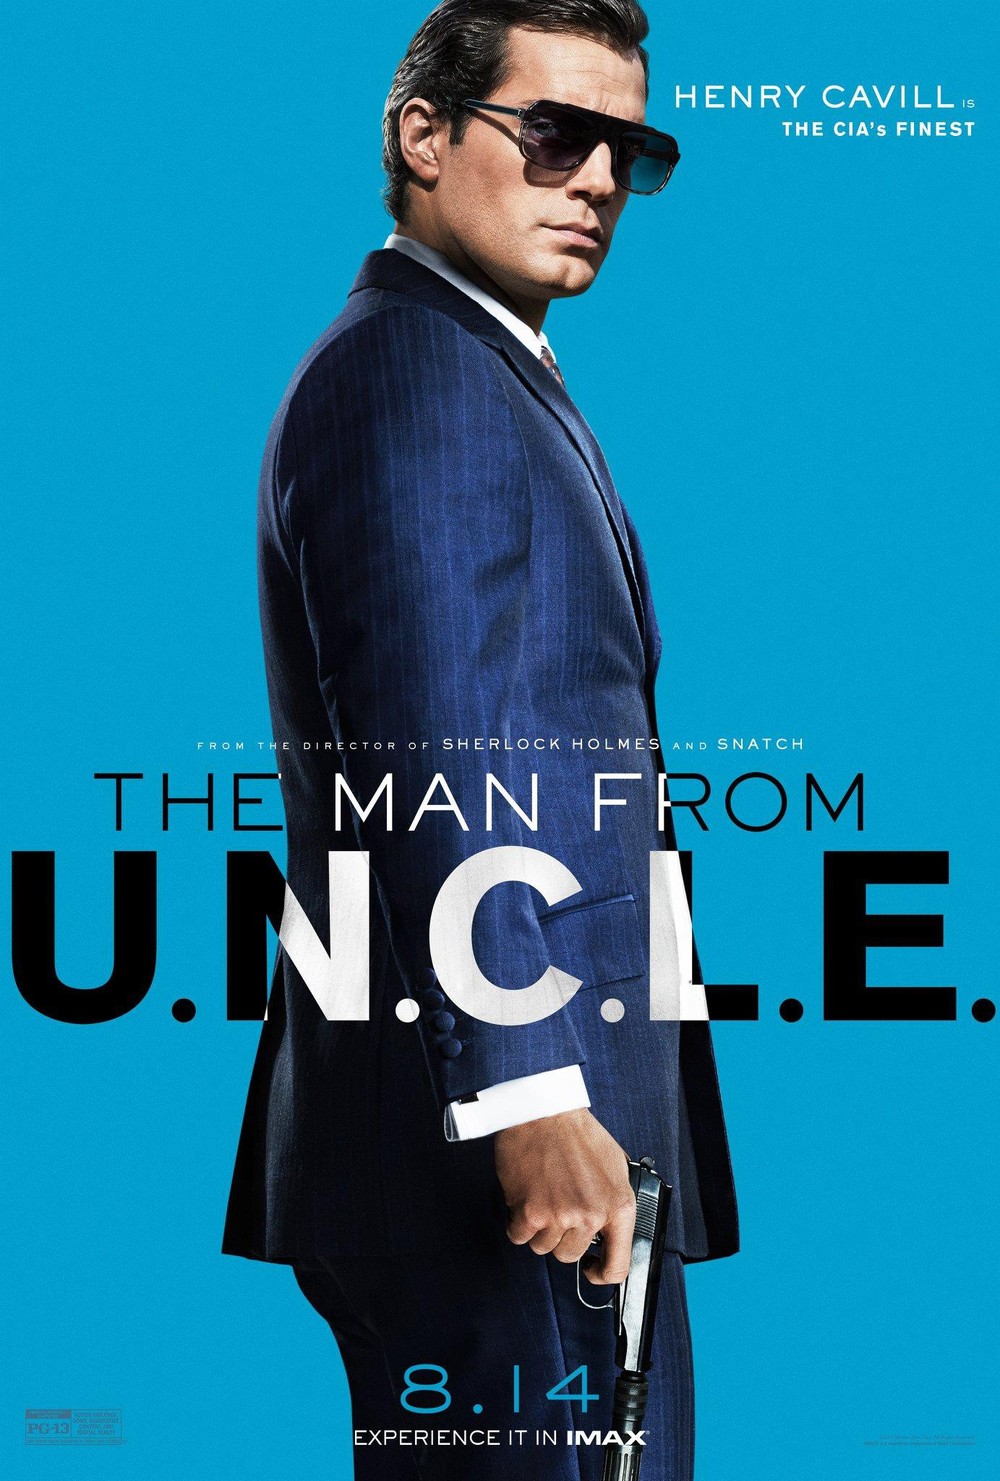 the man from u.n.c.l.e. 2015 full movie download online free